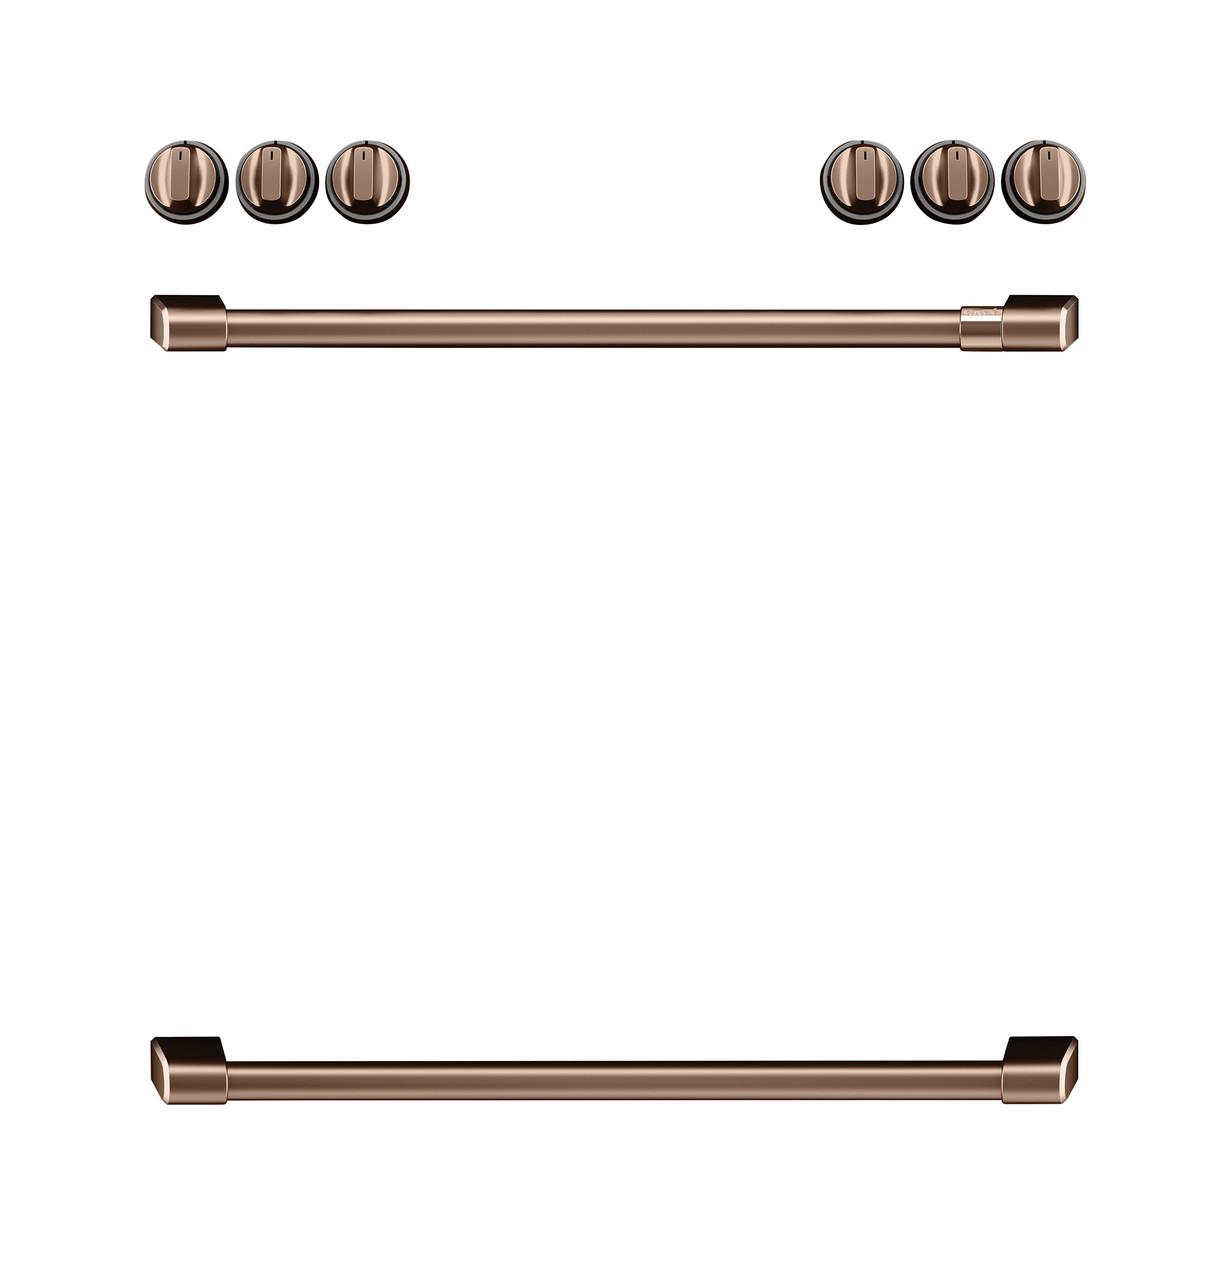 Cafe Caf(eback)™ Front Control Electric Knobs and Handles - Brushed Copper